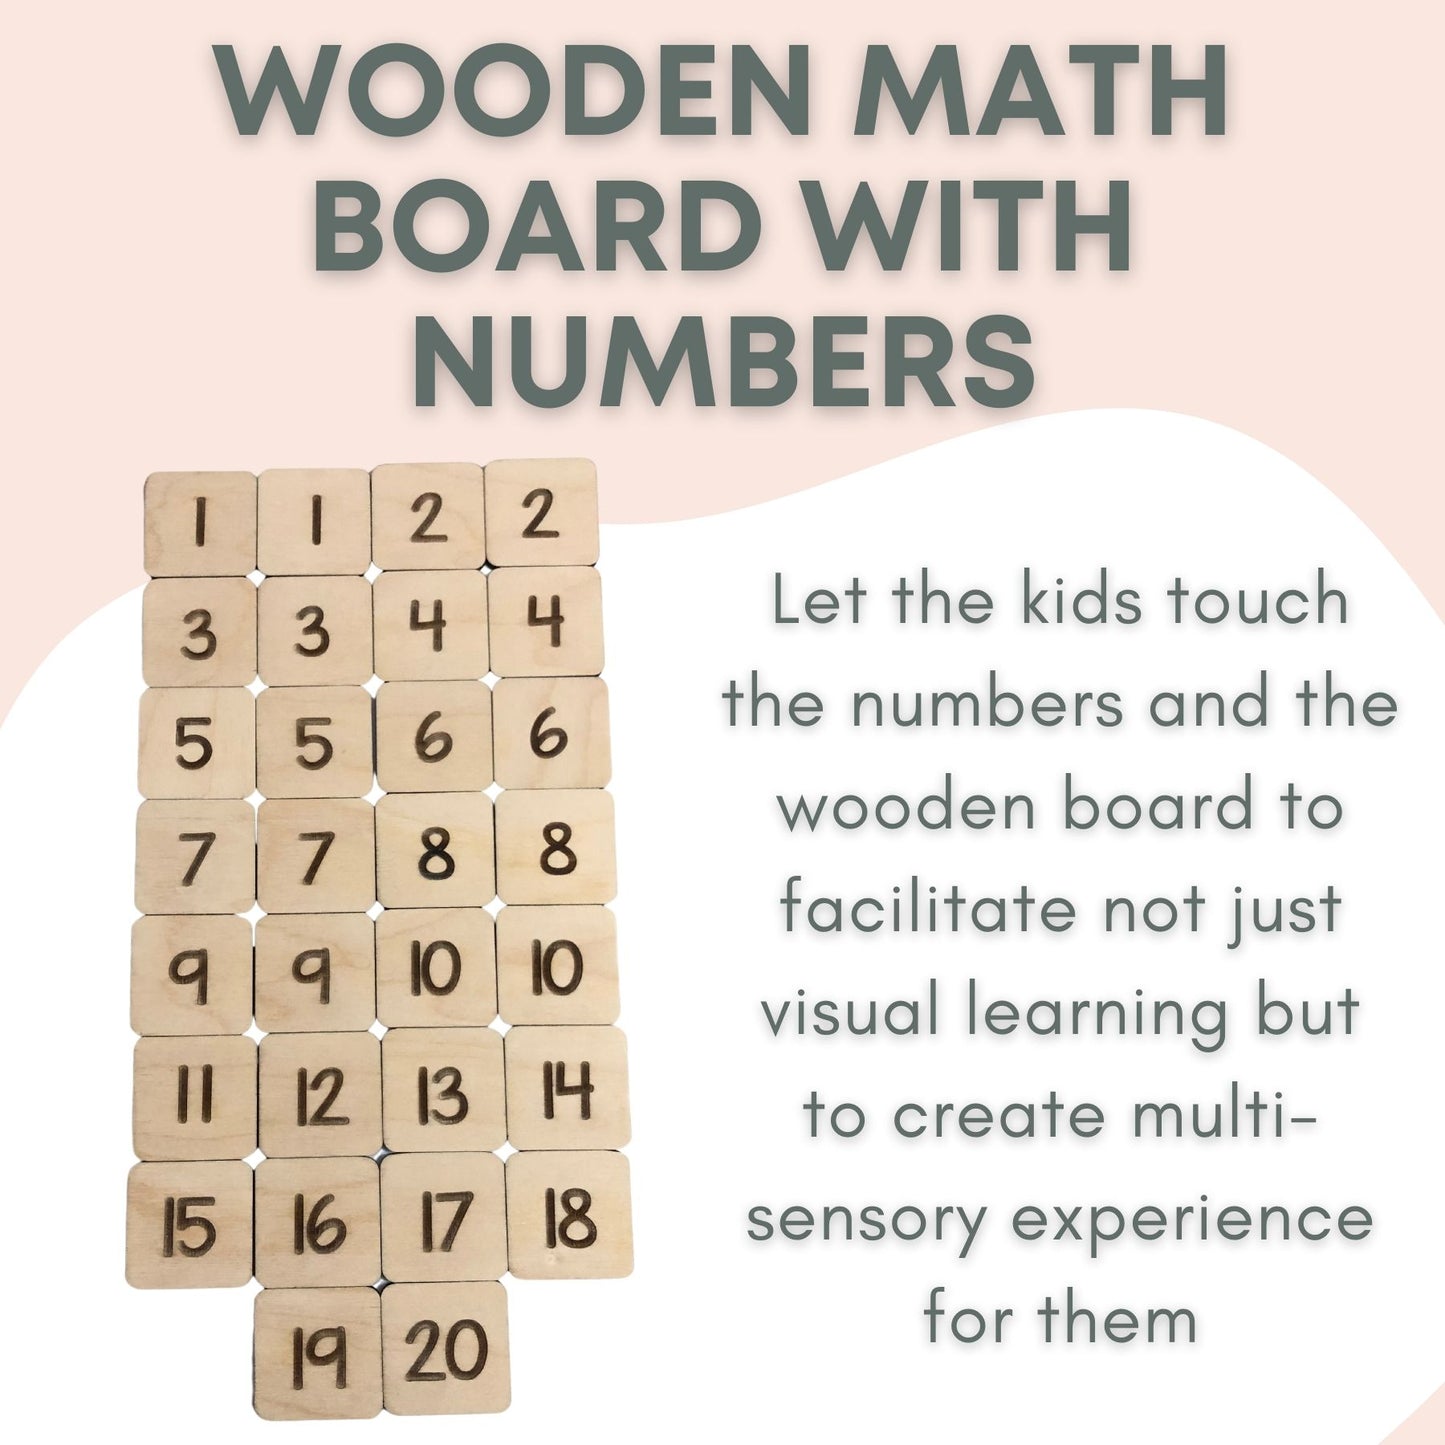 Wooden Math Board with Numbers